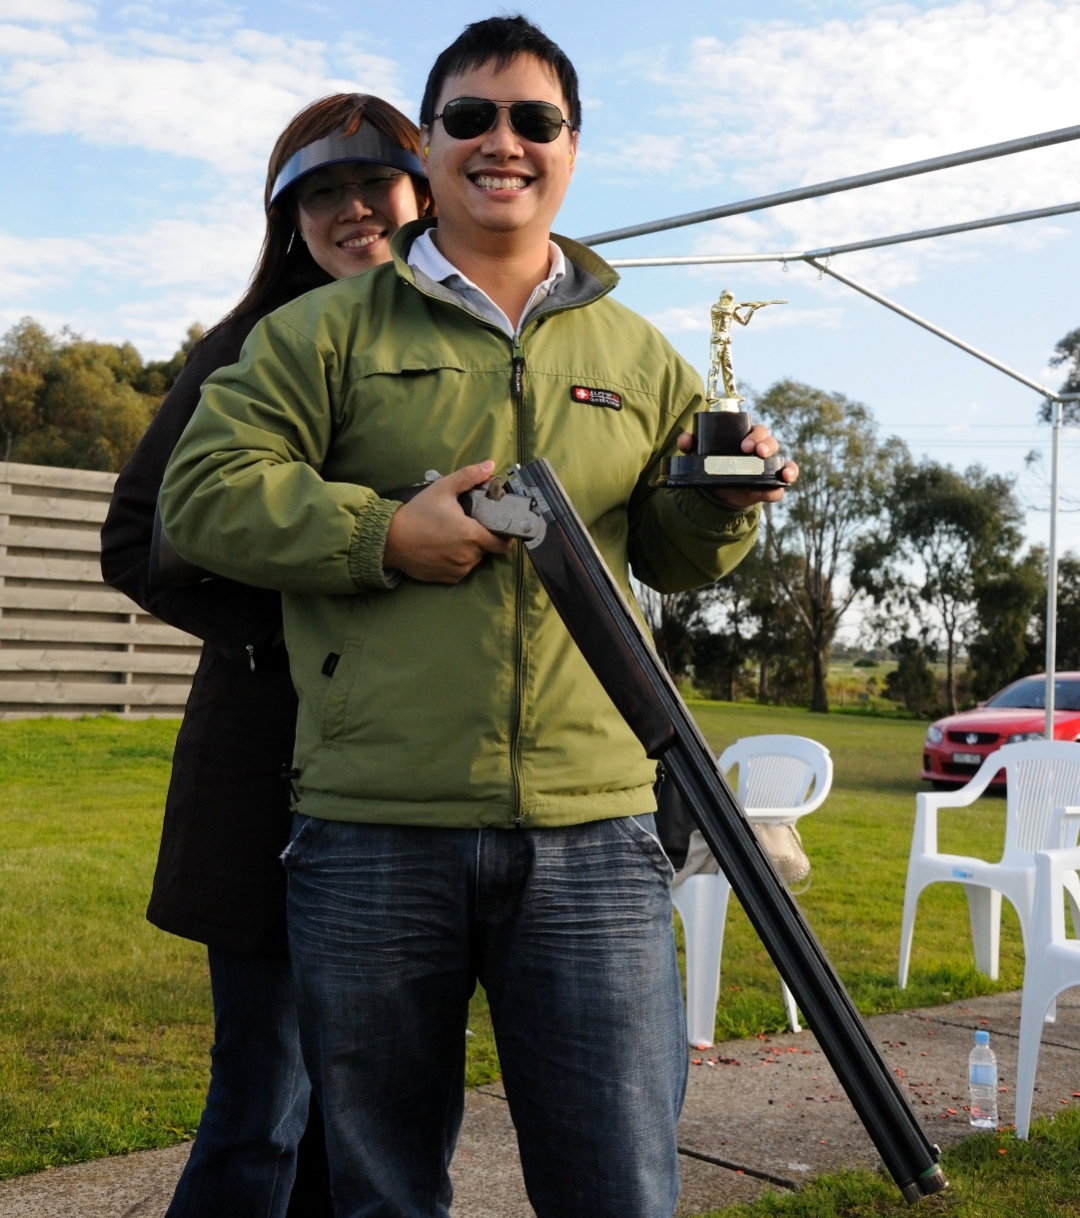  Exclusive session for 2 - Unlimited Clay Target Shooting with Olympic Medalist & 3 x World # 1 Adam Vella - Gift Voucher